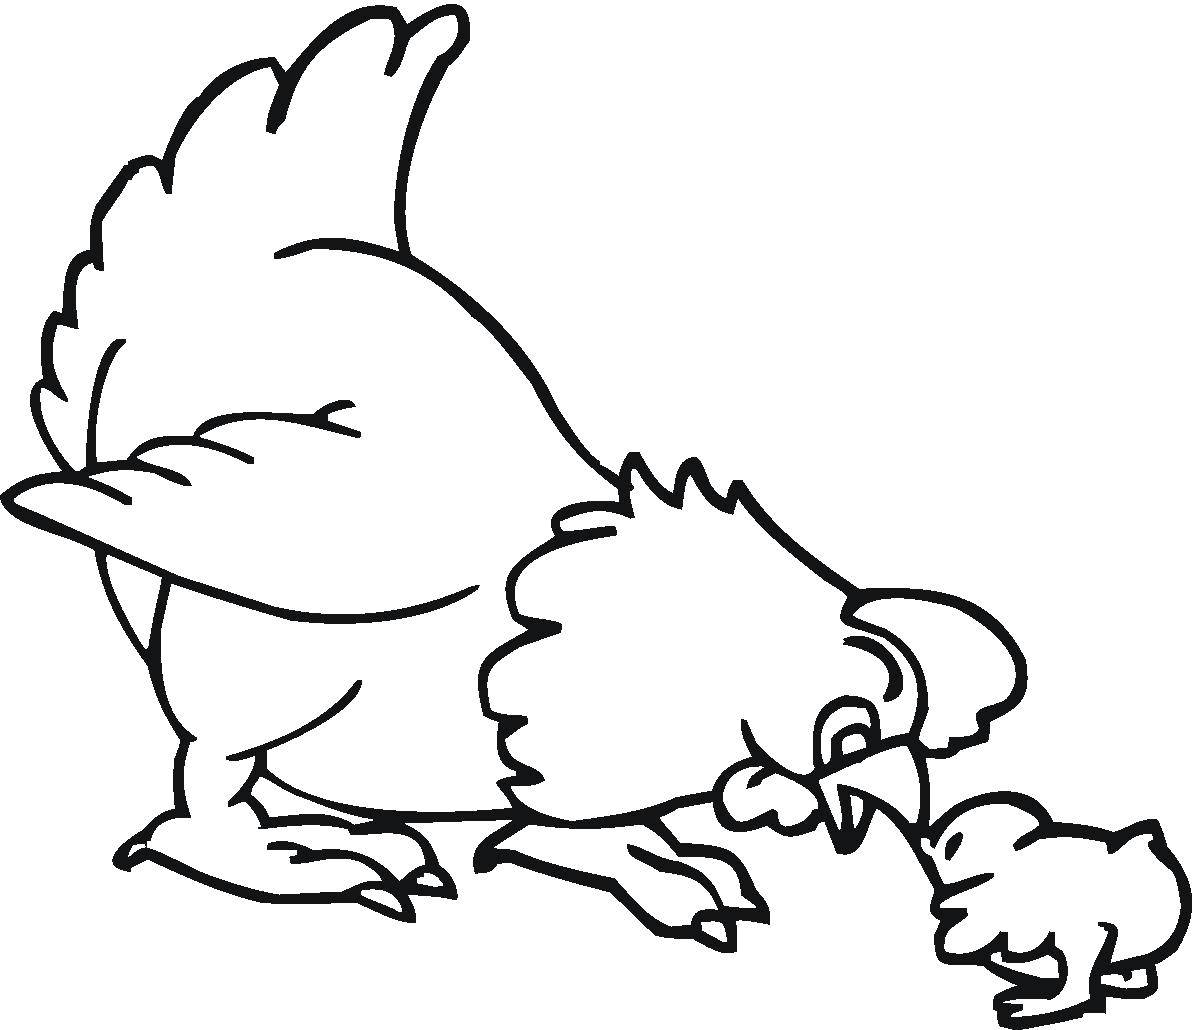 Coloring Hen and little chick. Category birds. Tags:  chicken, chicken.